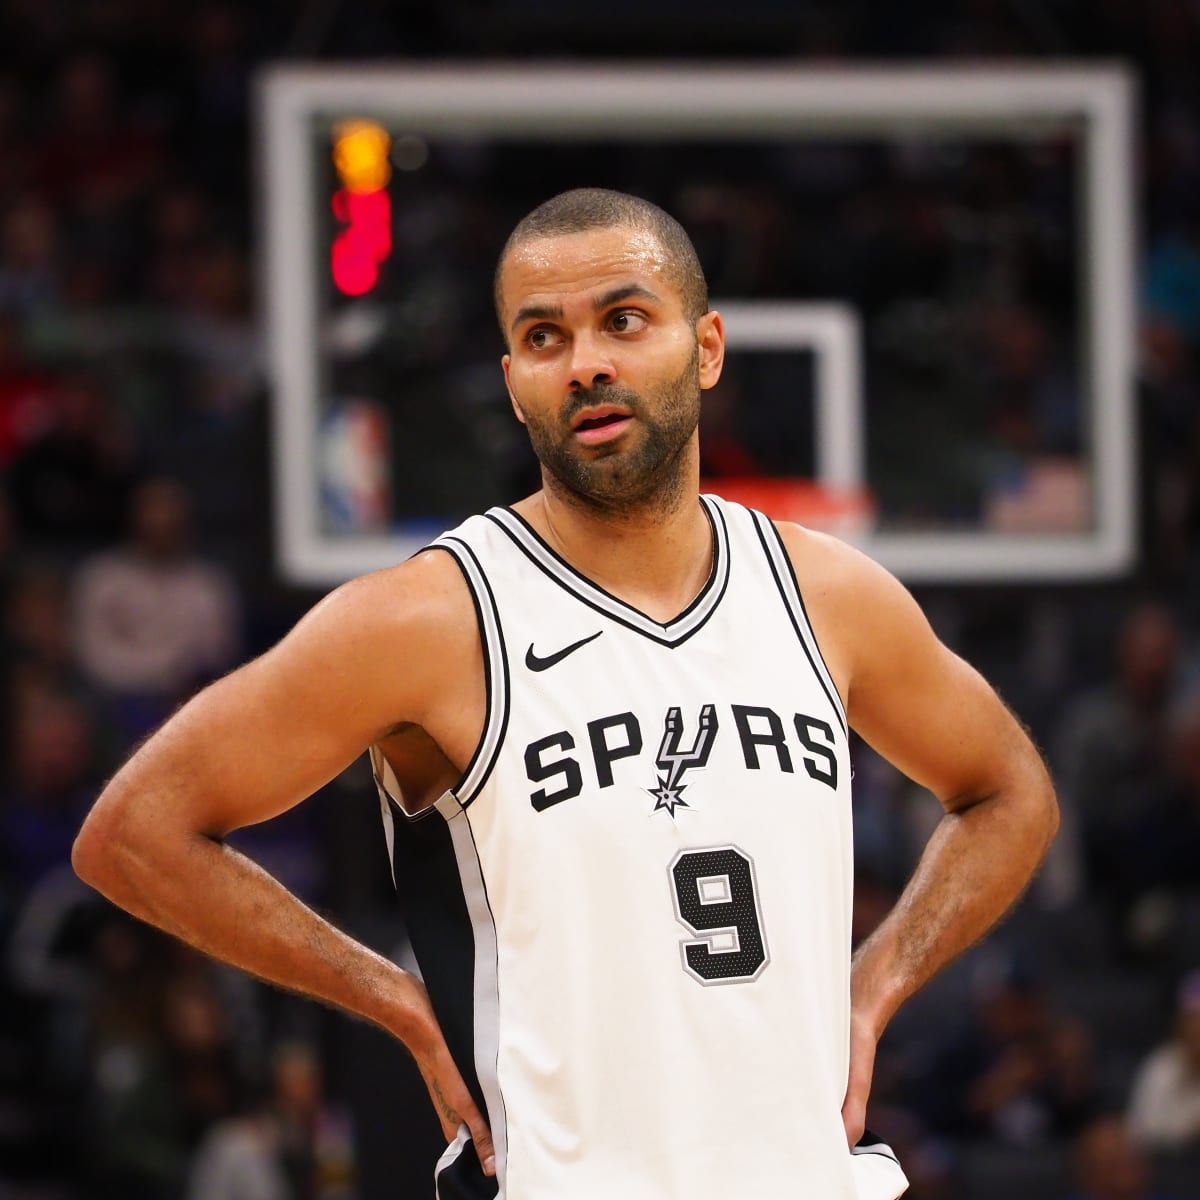 NBA players, coaches talk about Tony Parker on his jersey